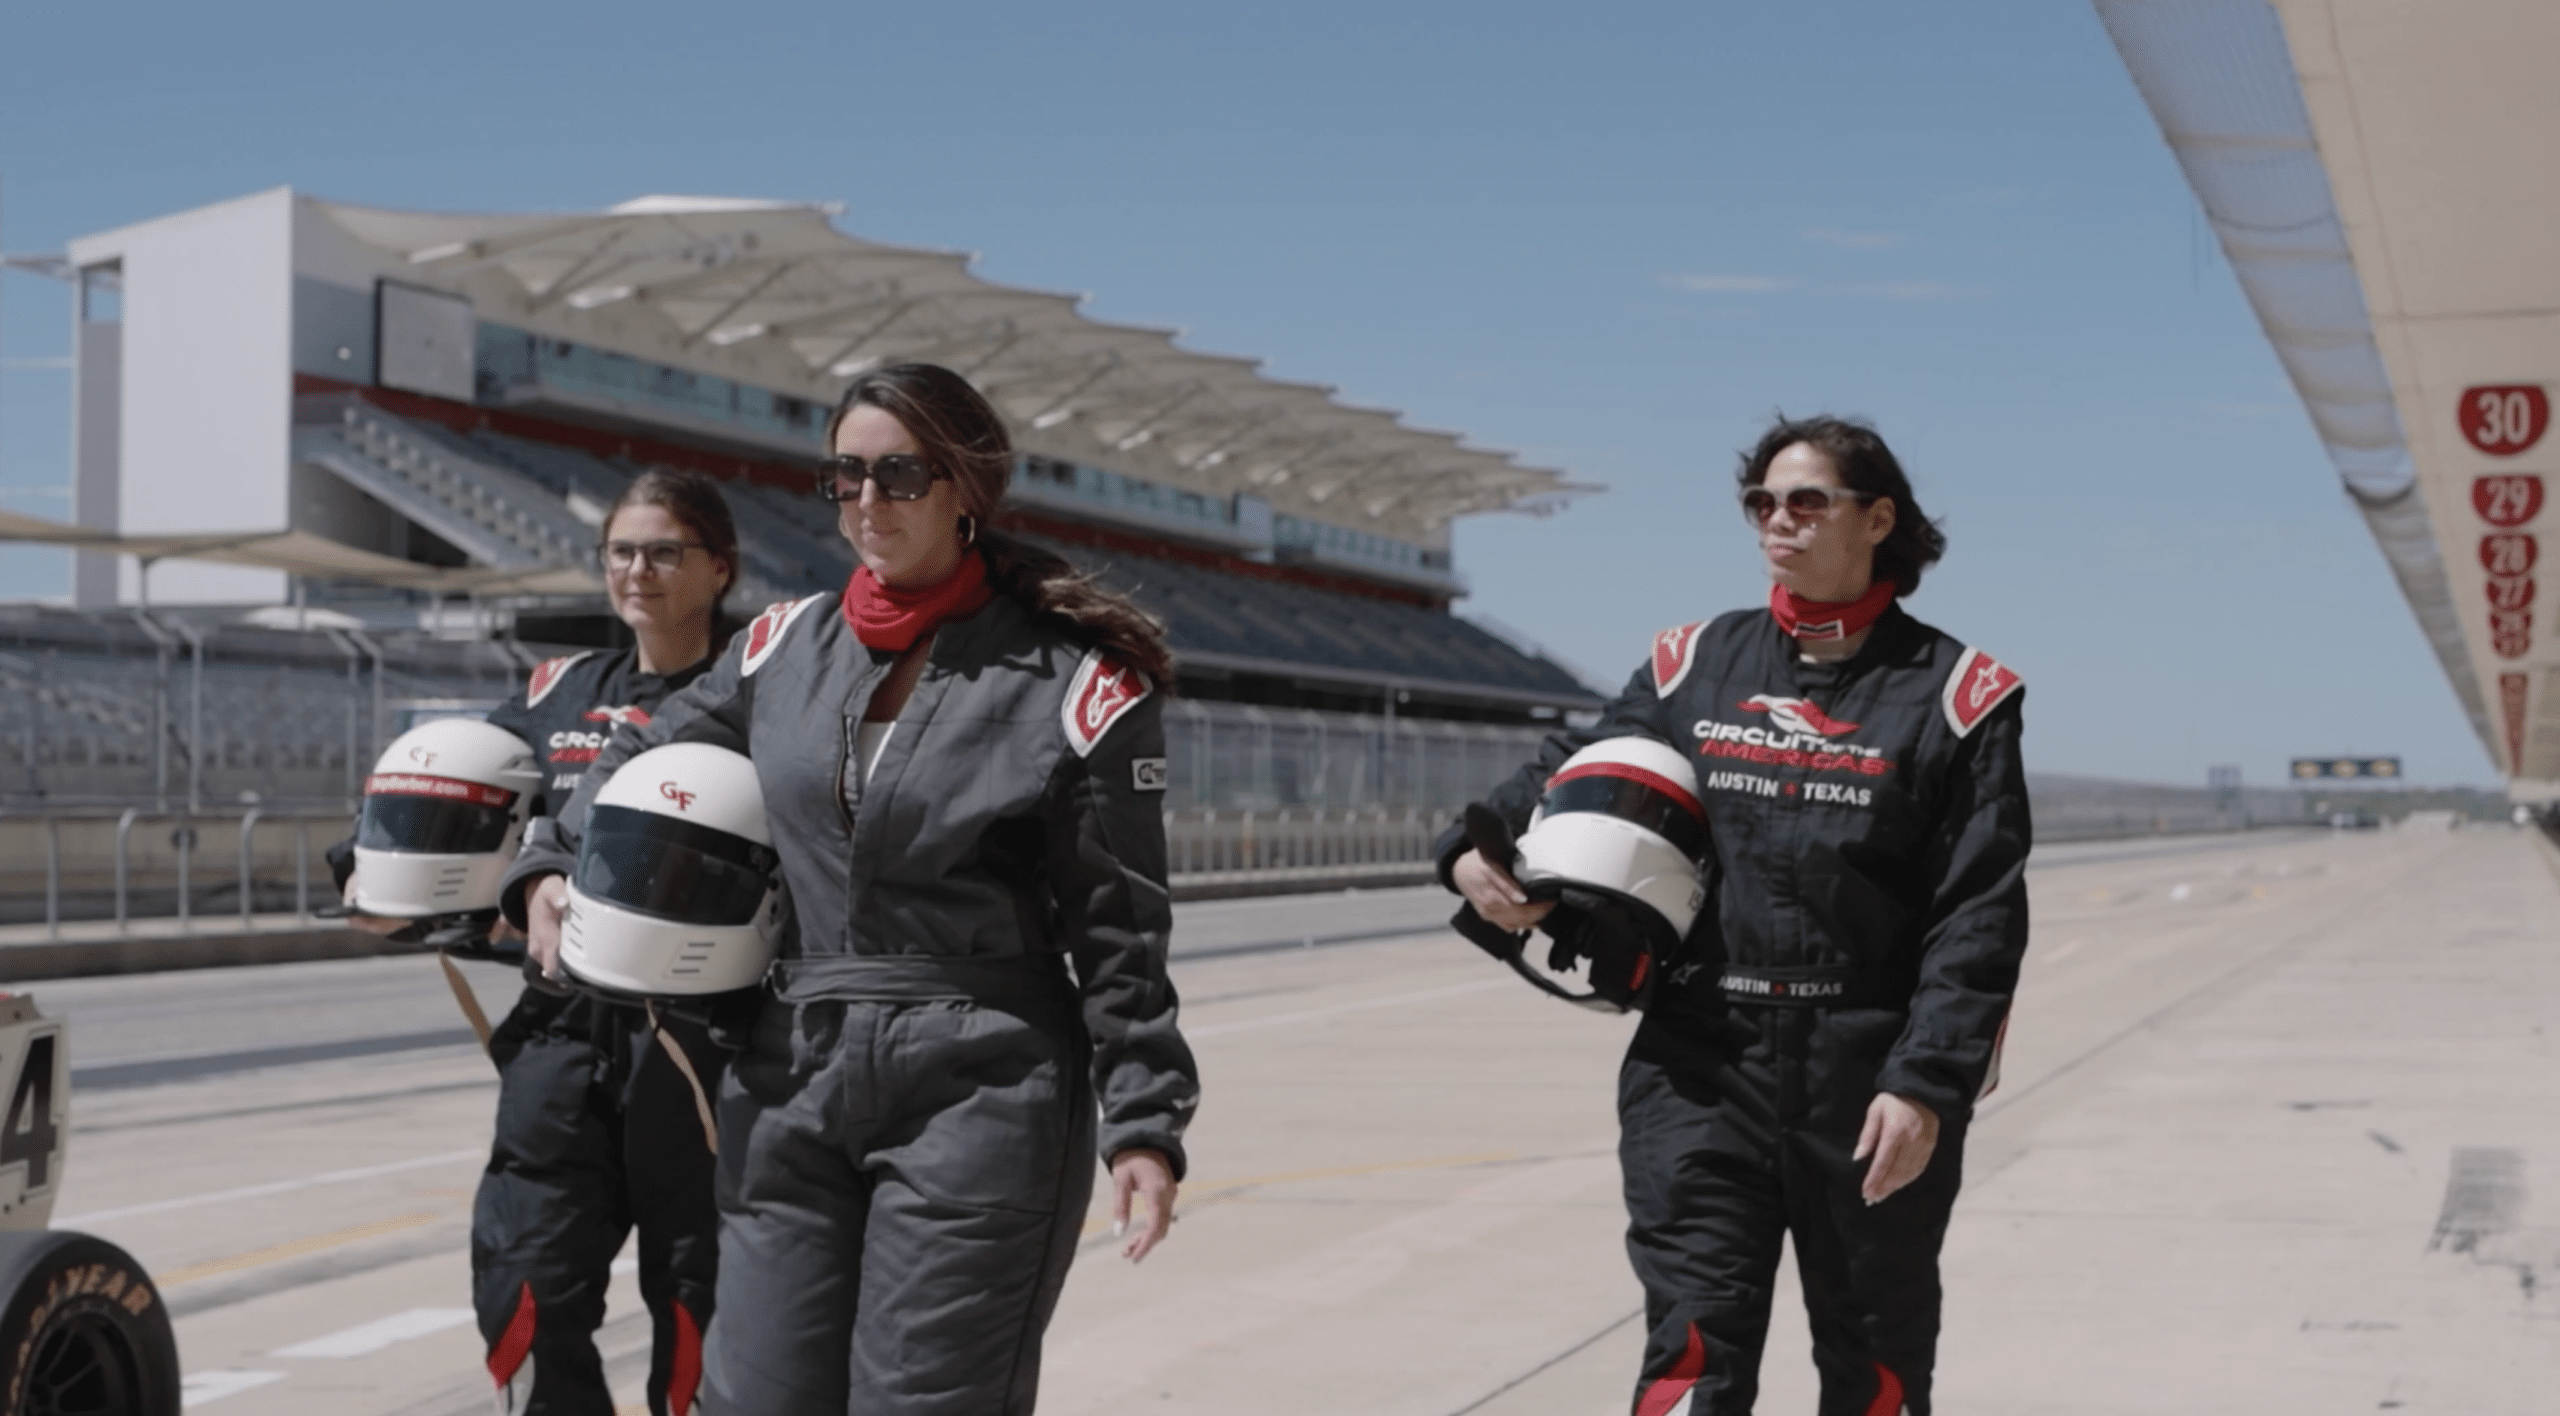 women at an experiential event at SXSW in racing gear and helmets on the track